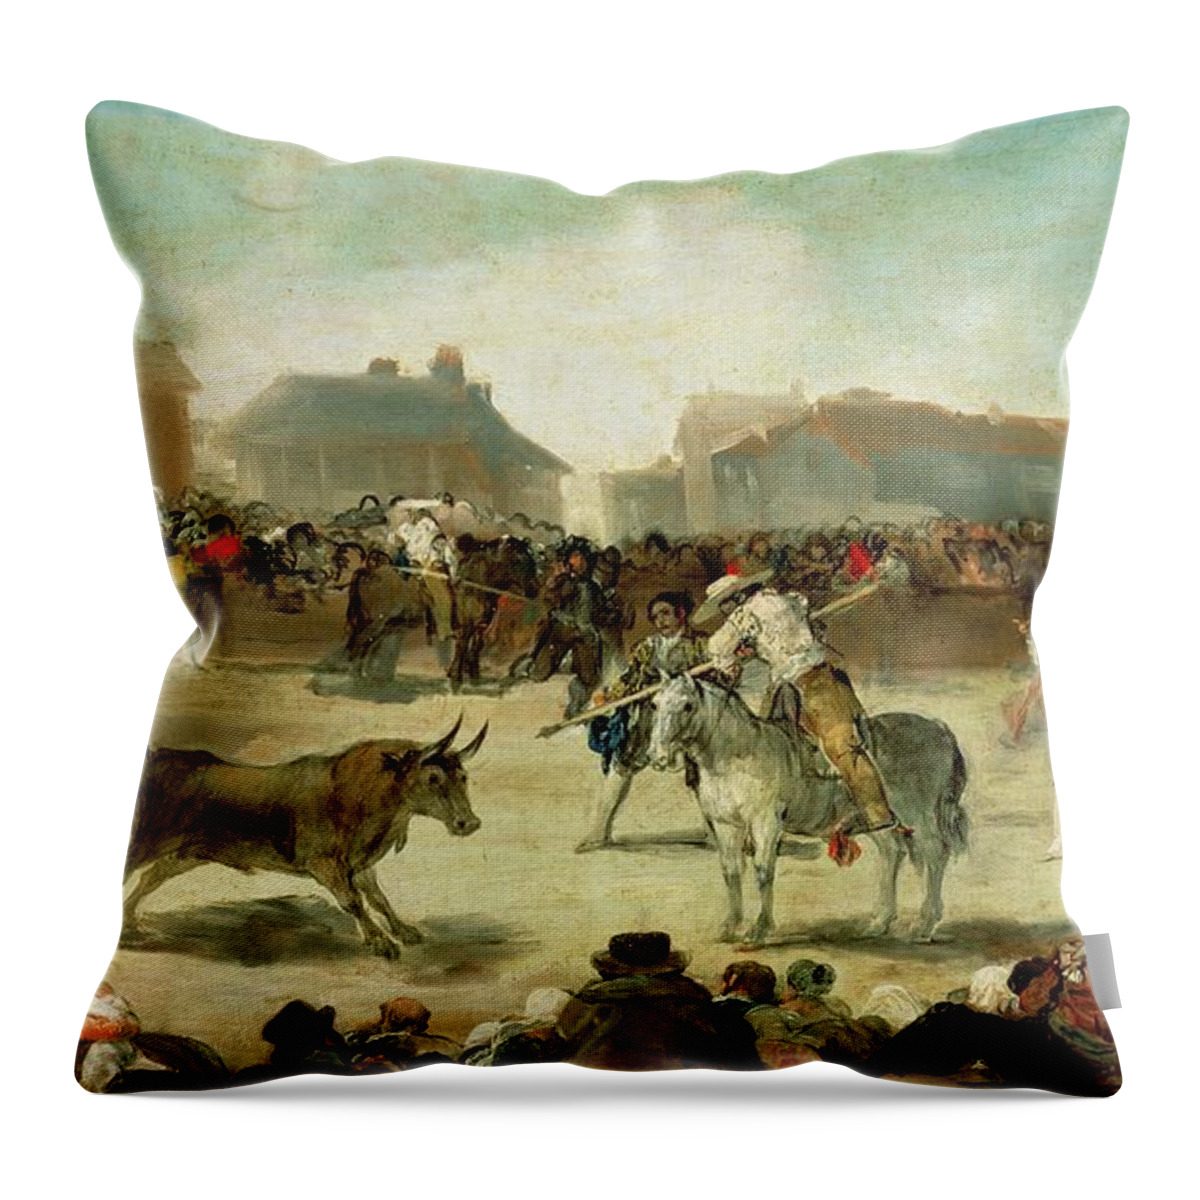 Village Throw Pillow featuring the painting A Village Bullfight by Goya